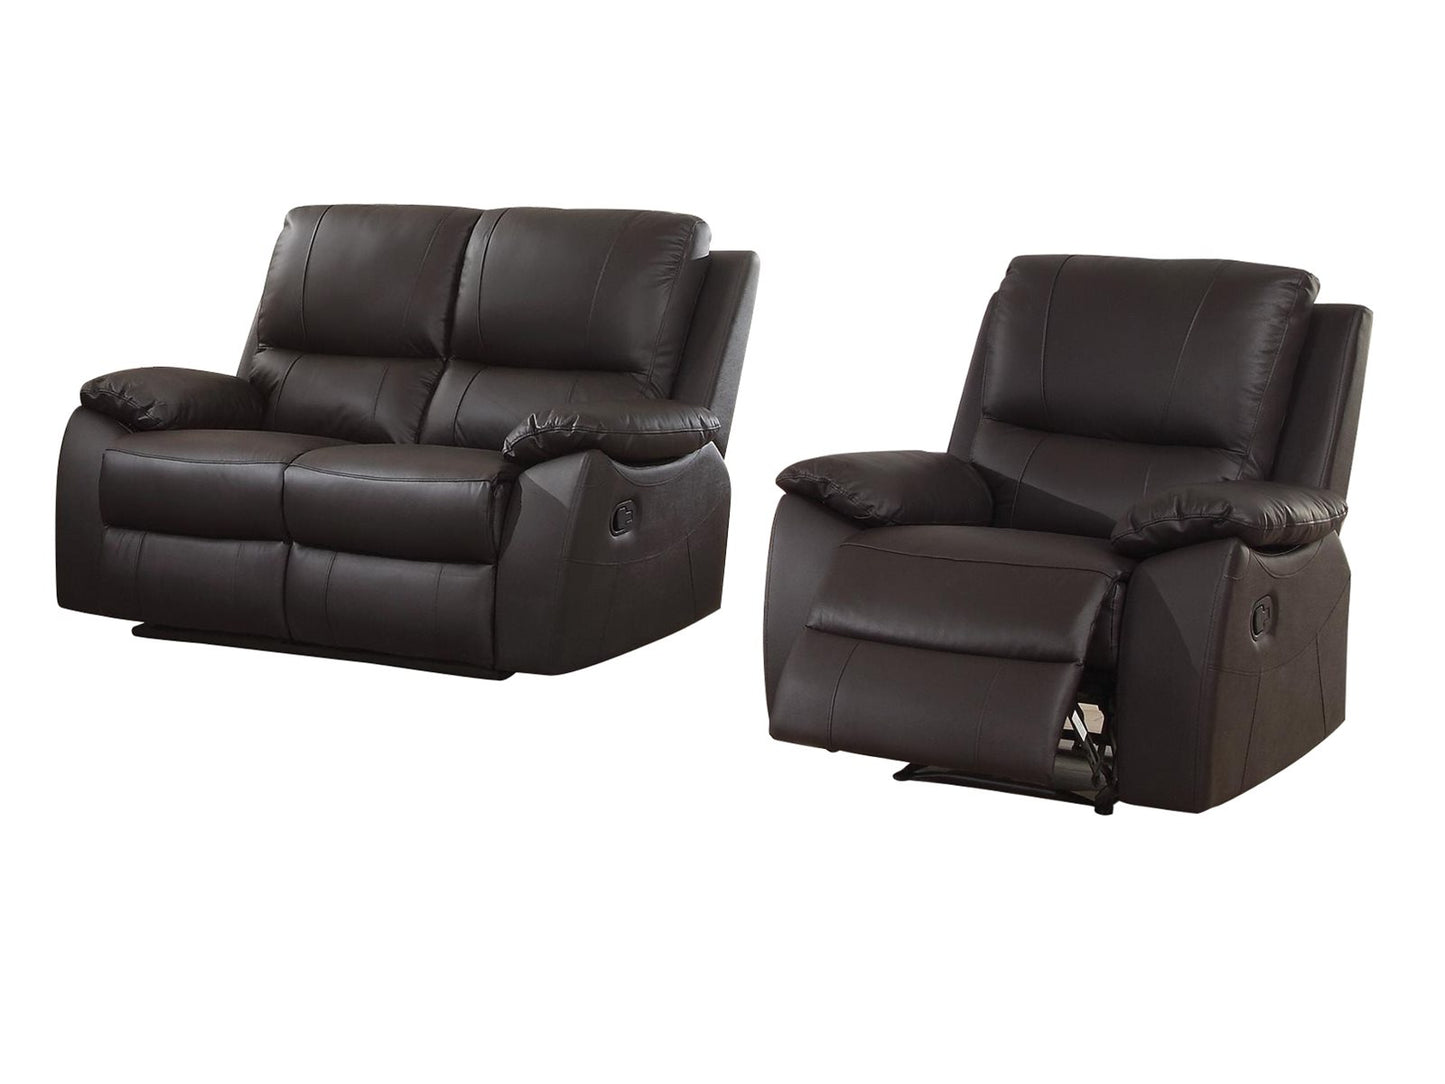 Homelegance Greeley 2PC Double Reclining Love Seat & Recliner Chair in Brown Leather